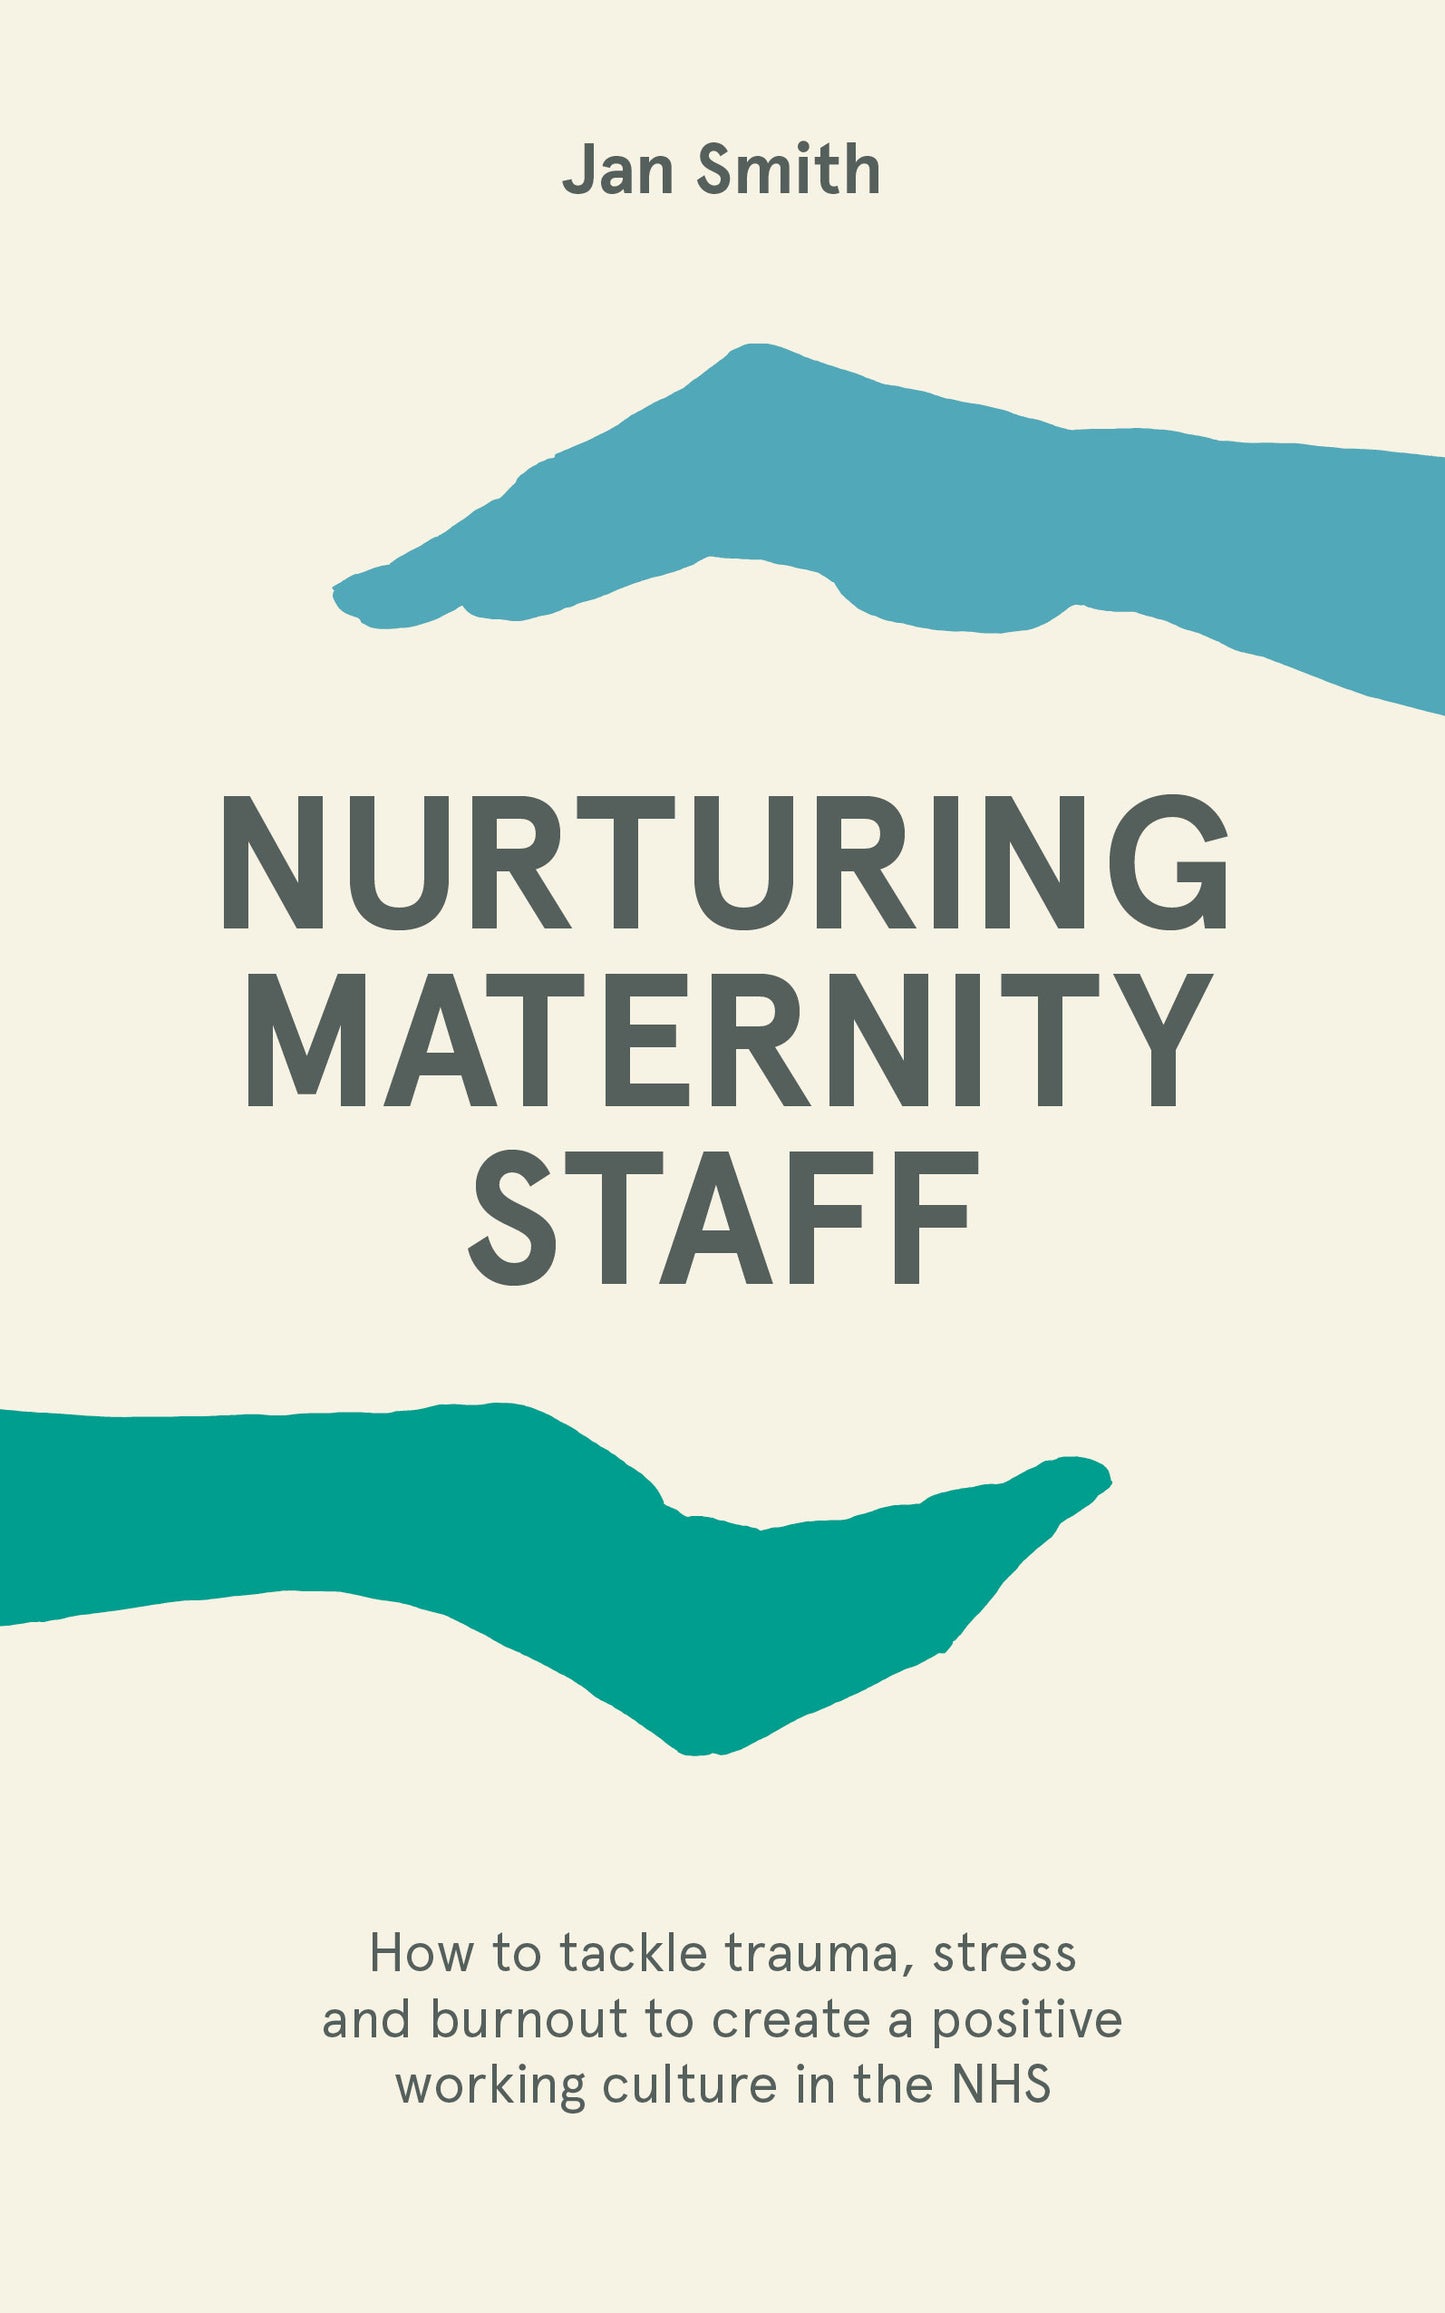 Nurturing Maternity Staff: How to tackle trauma, stress and burnout to create a positive working culture in the NHS